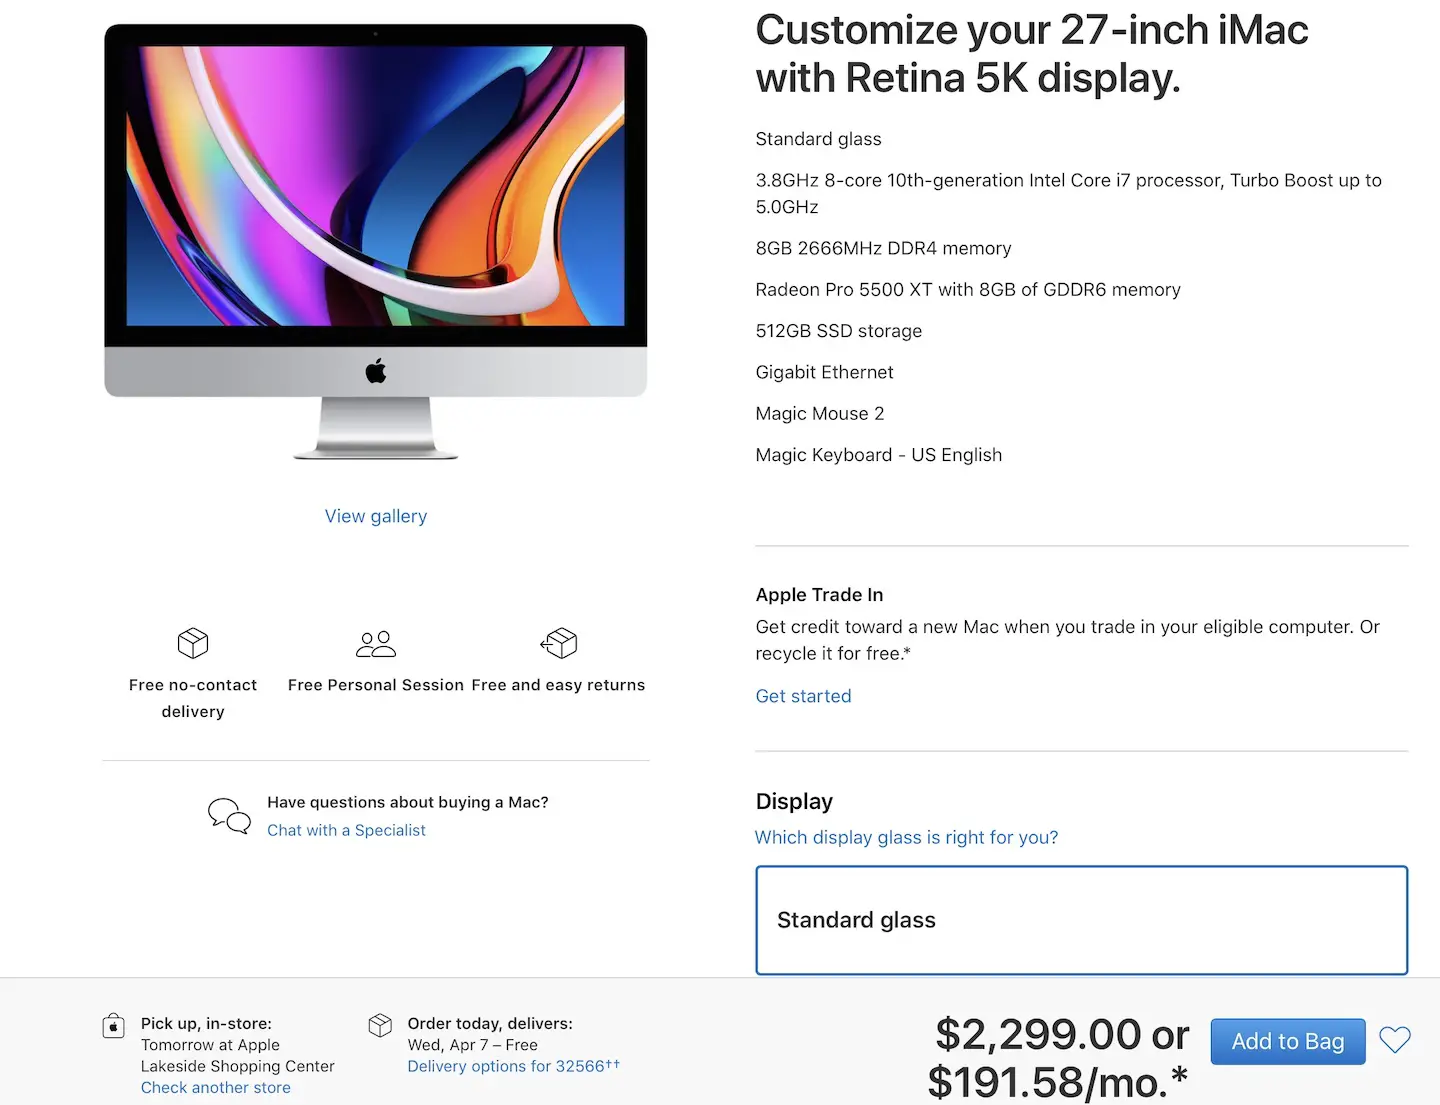 Higher-end 27 Inch iMac Not Available on Amazon Or Best Buy1